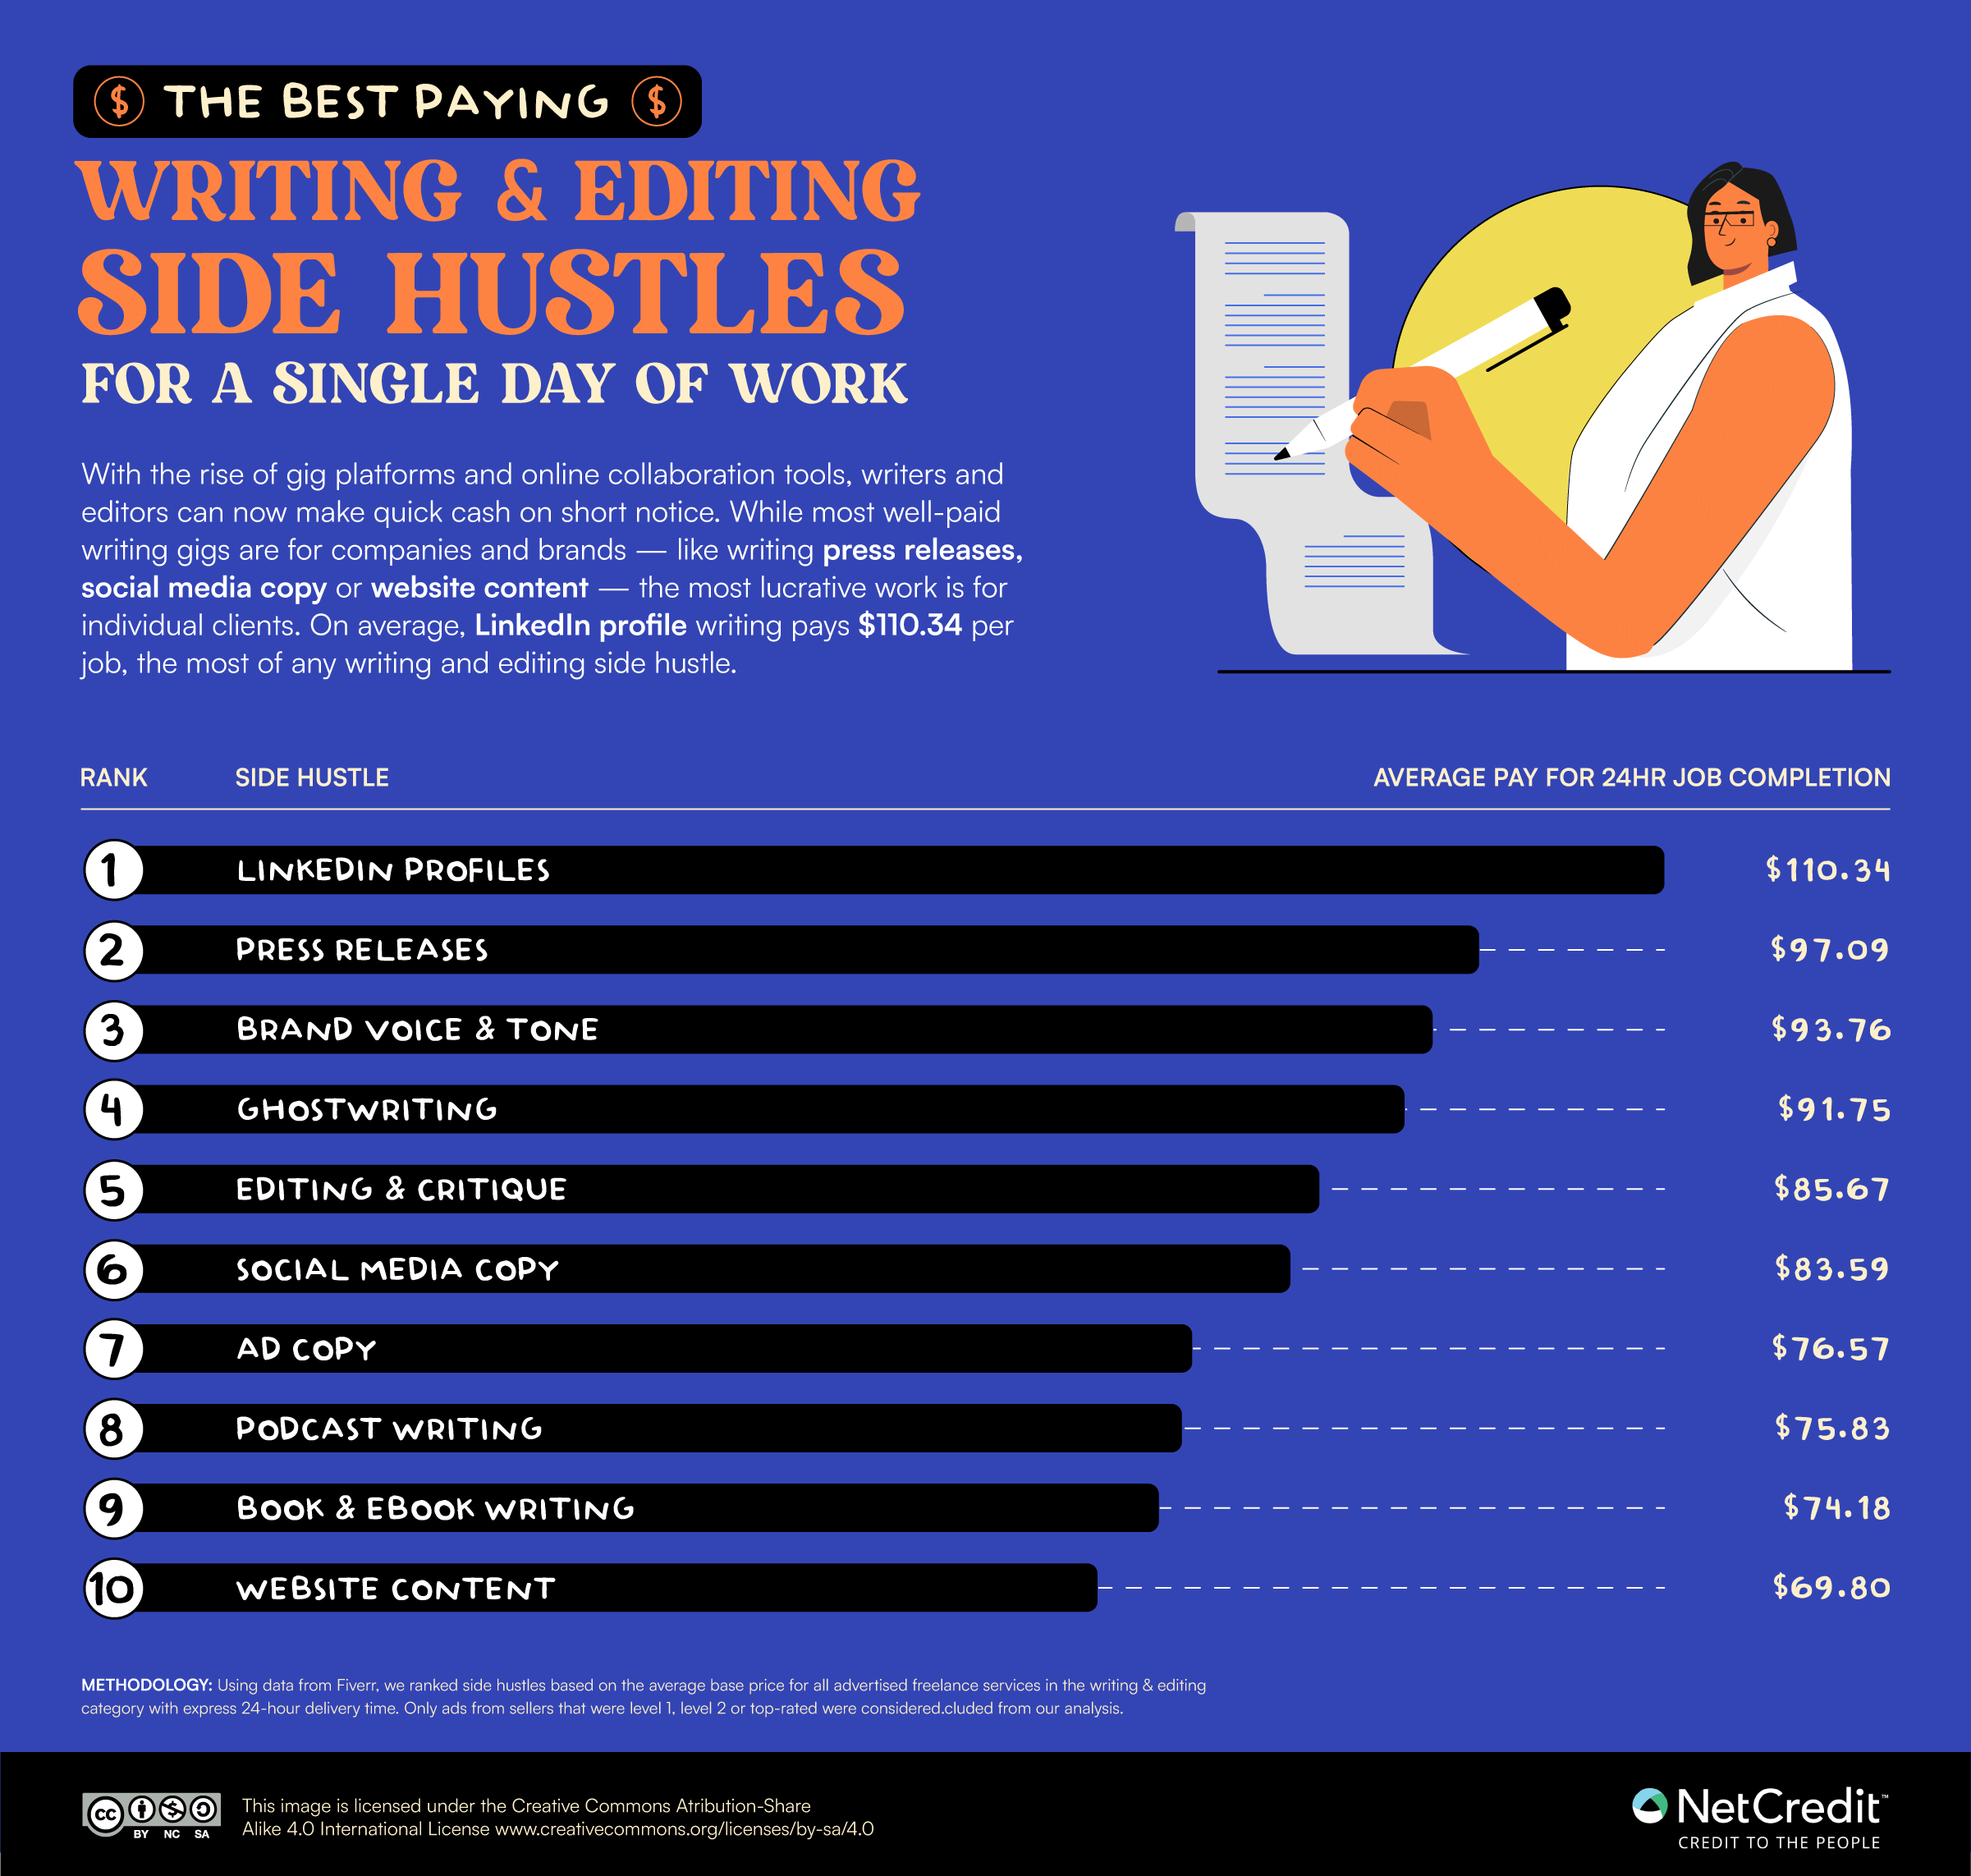 Ranking of the best paying writing and editing side hustles